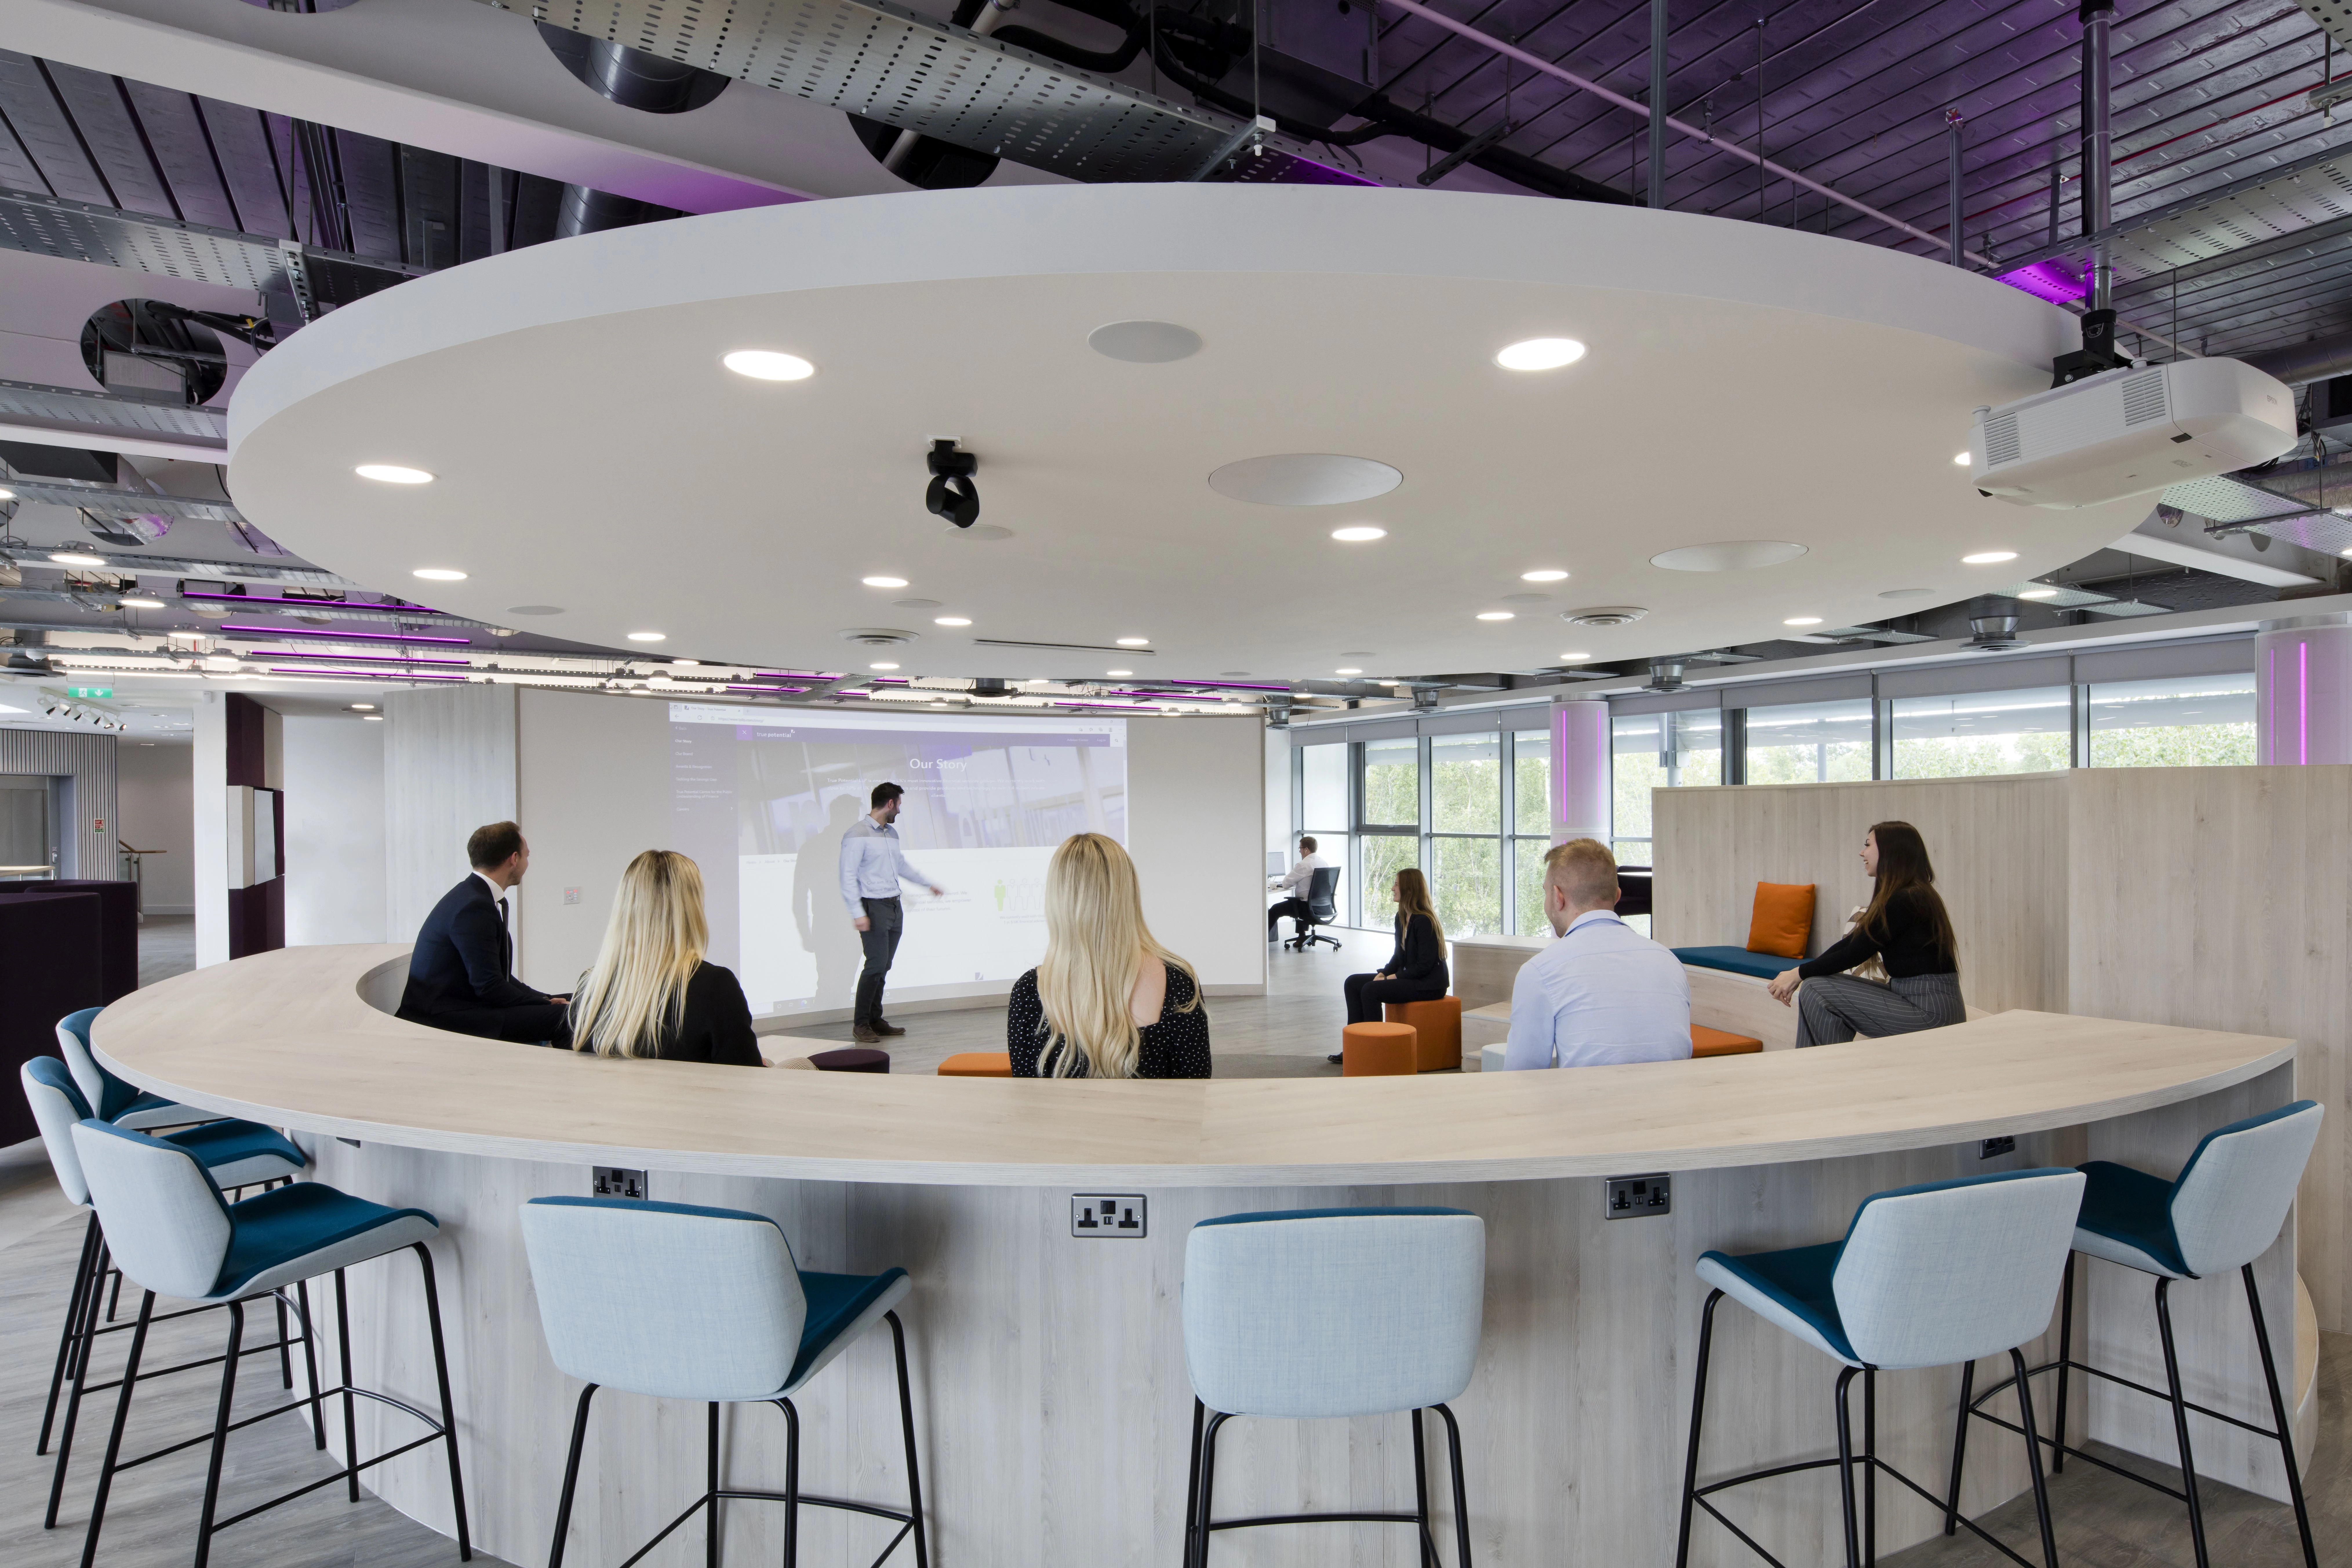 Settings from amphitheatres to dining booths and boardrooms to café space all allow for social distancing.